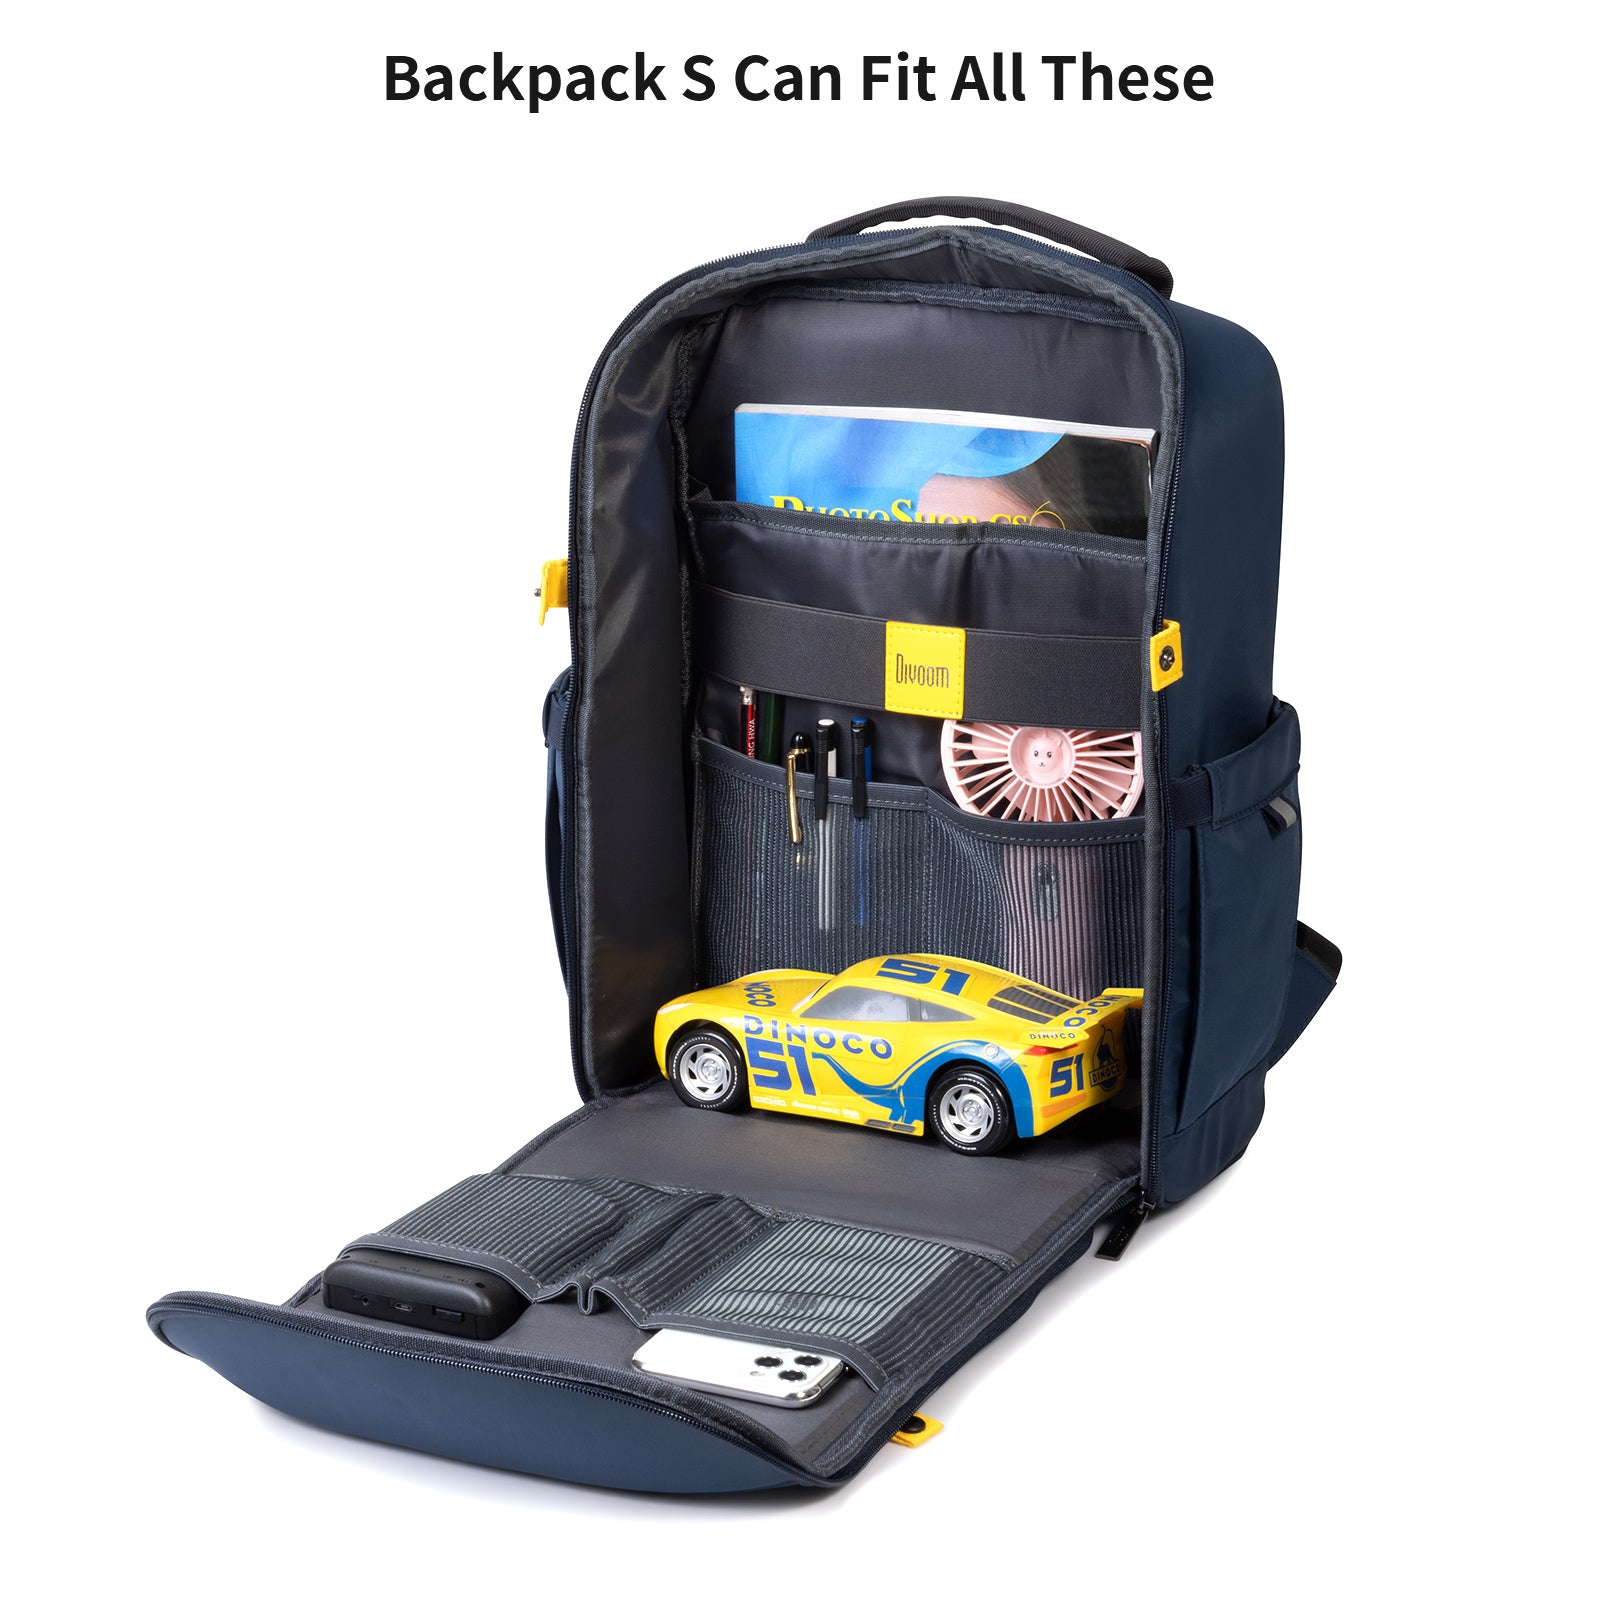 Backpack S with huge storage space